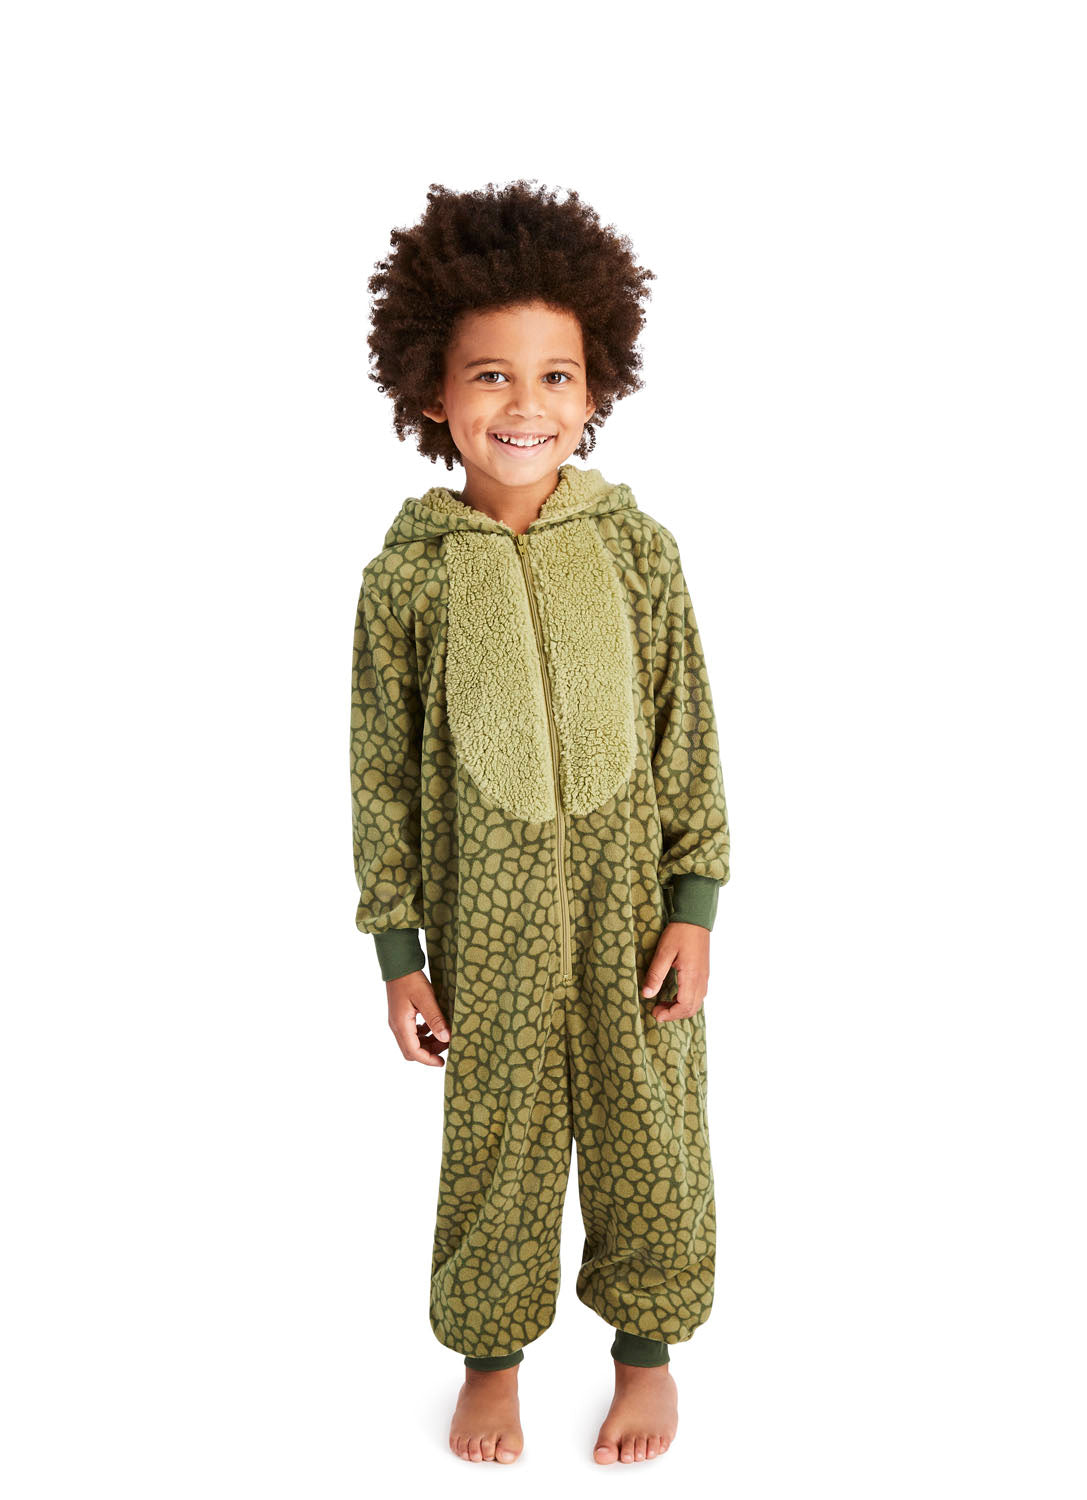 Little boy smiling and wearing Dino Onesie in green colour